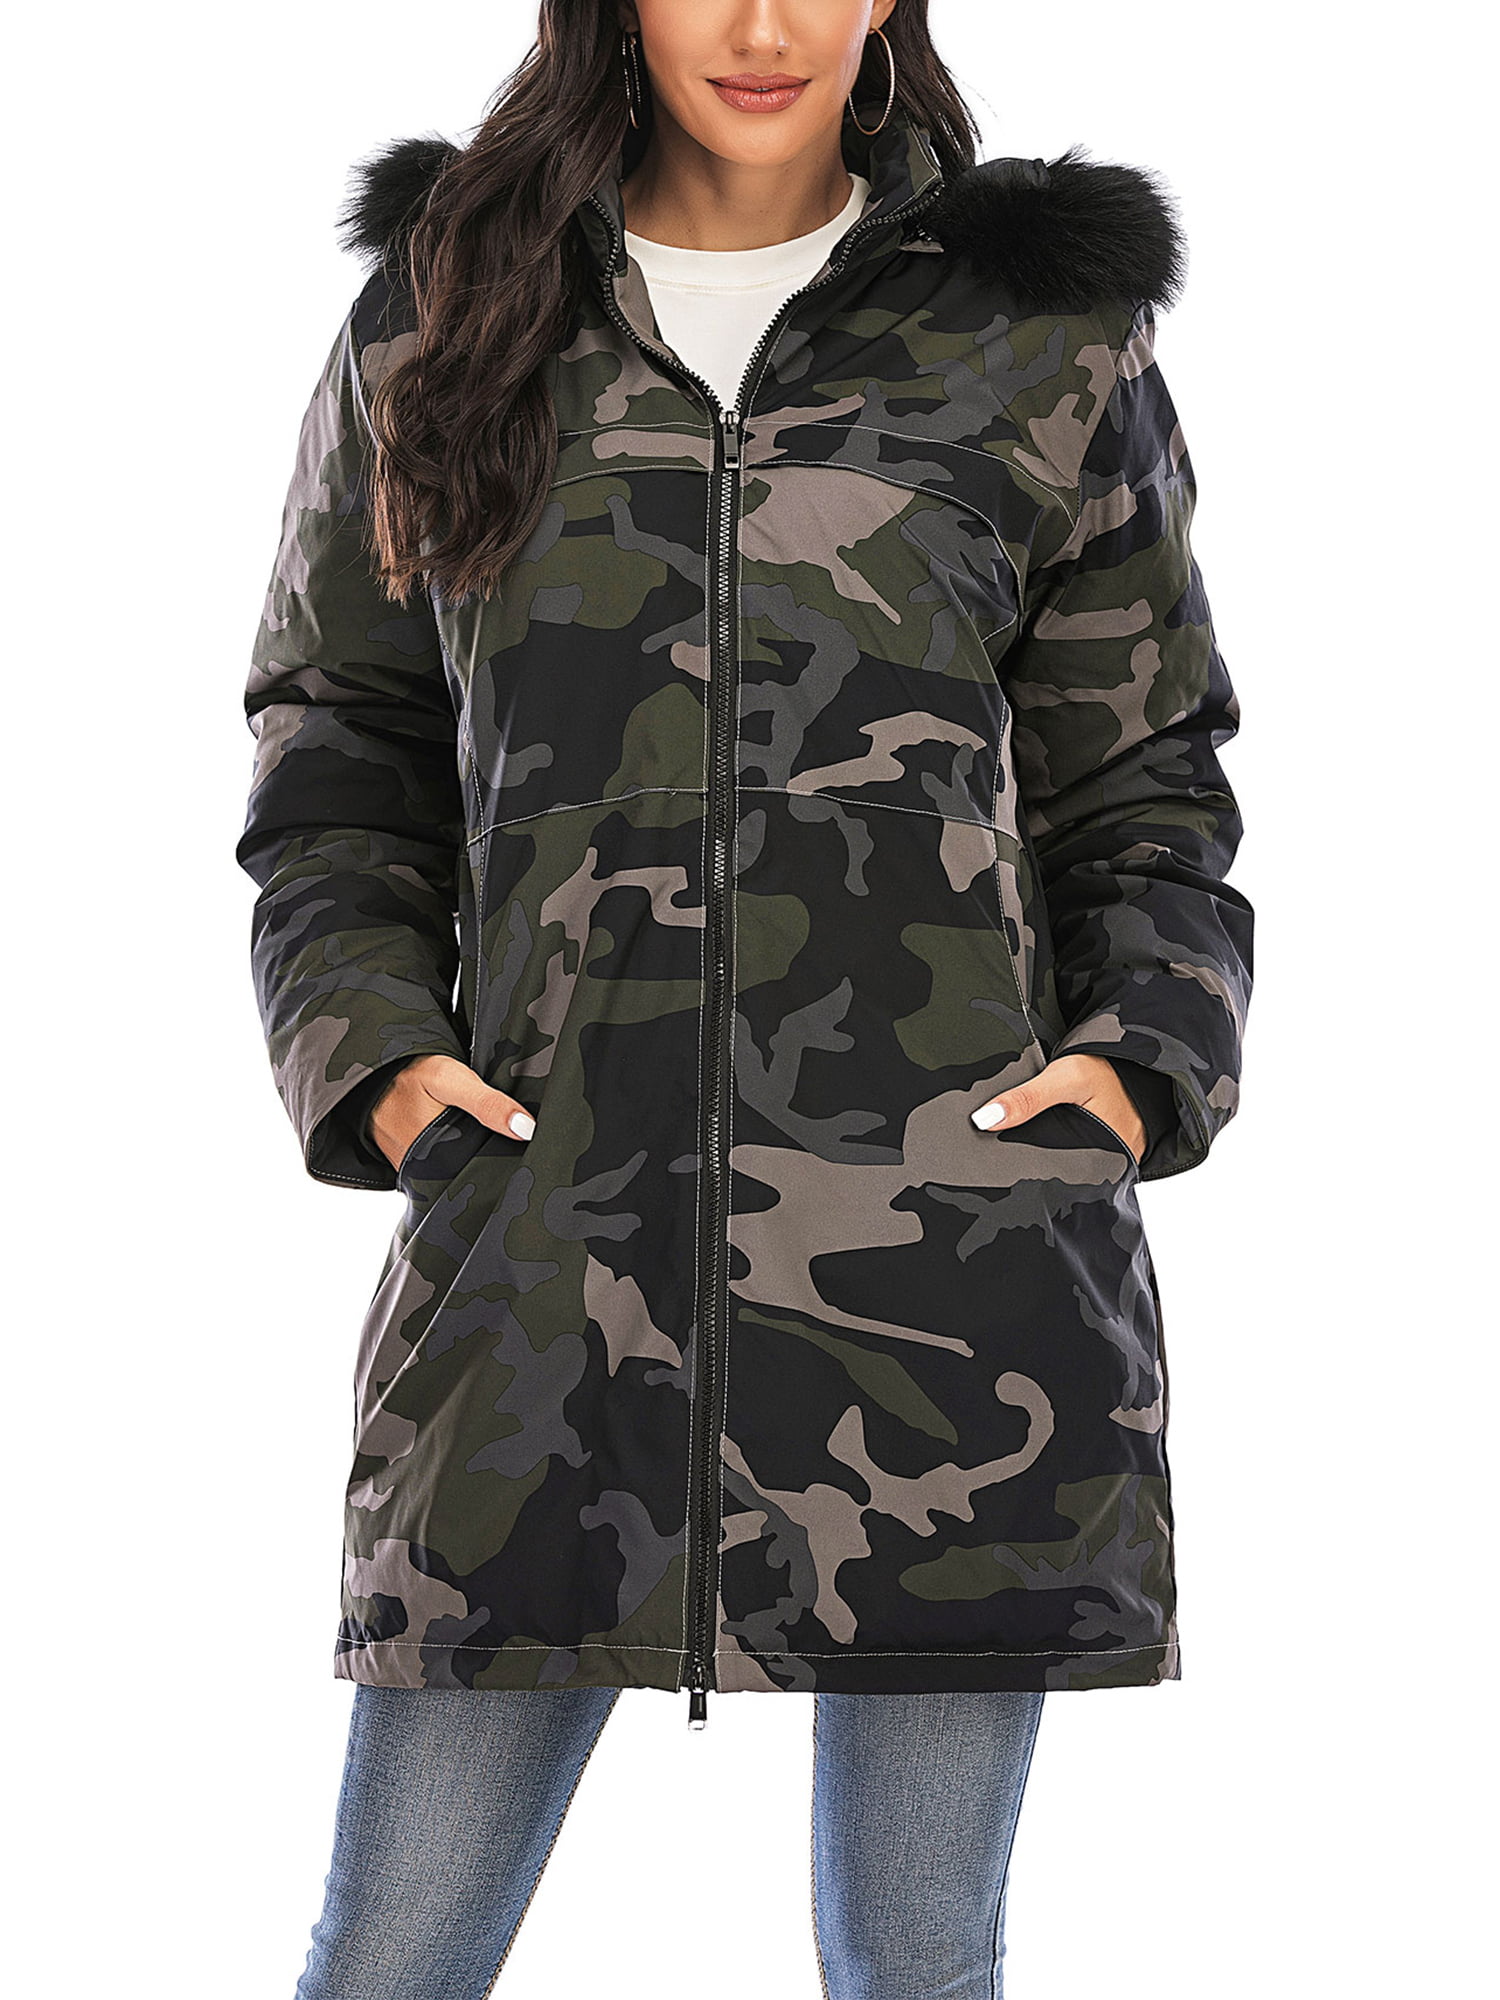 Womens Winter Hooded Thickened Long Down Jacket Maxi Down Parka Puffer Coat with Thick Furry Collar